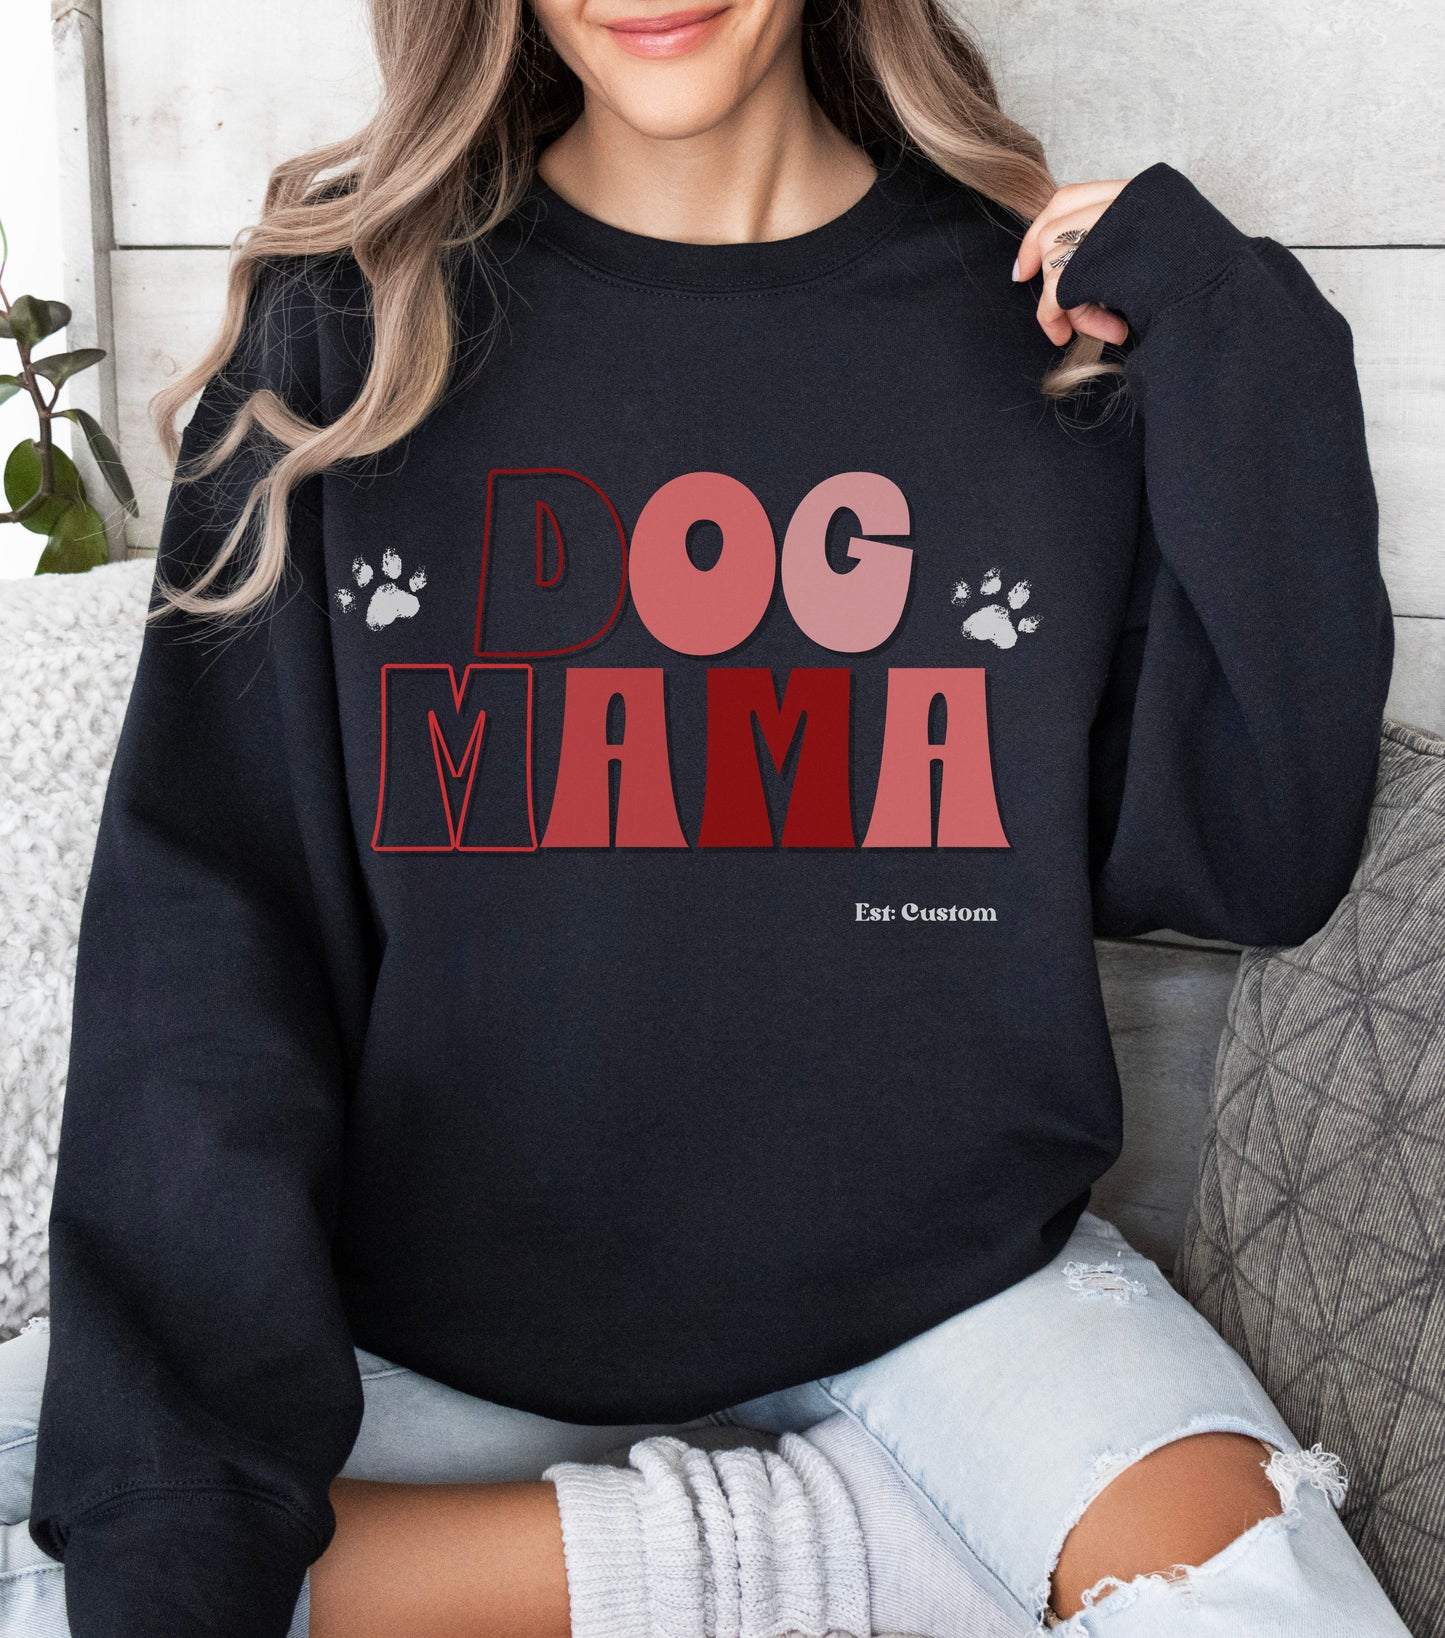 personalized trendy dog mom sweatshirt personalized gift for Aussie  dog mom